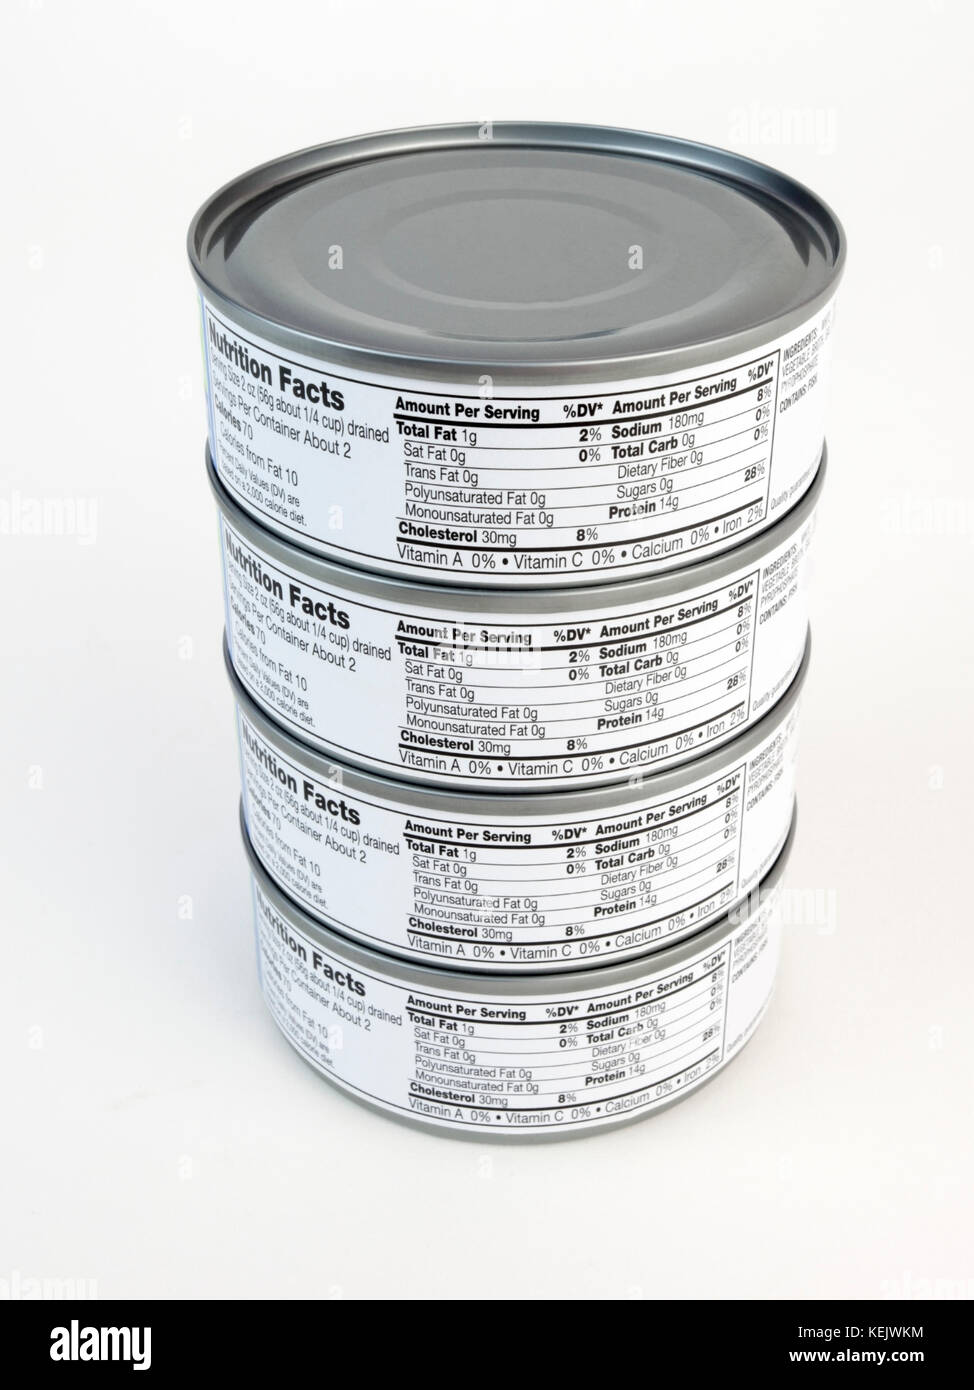 Stacked cans of tuna with nutritional information on label. Stock Photo